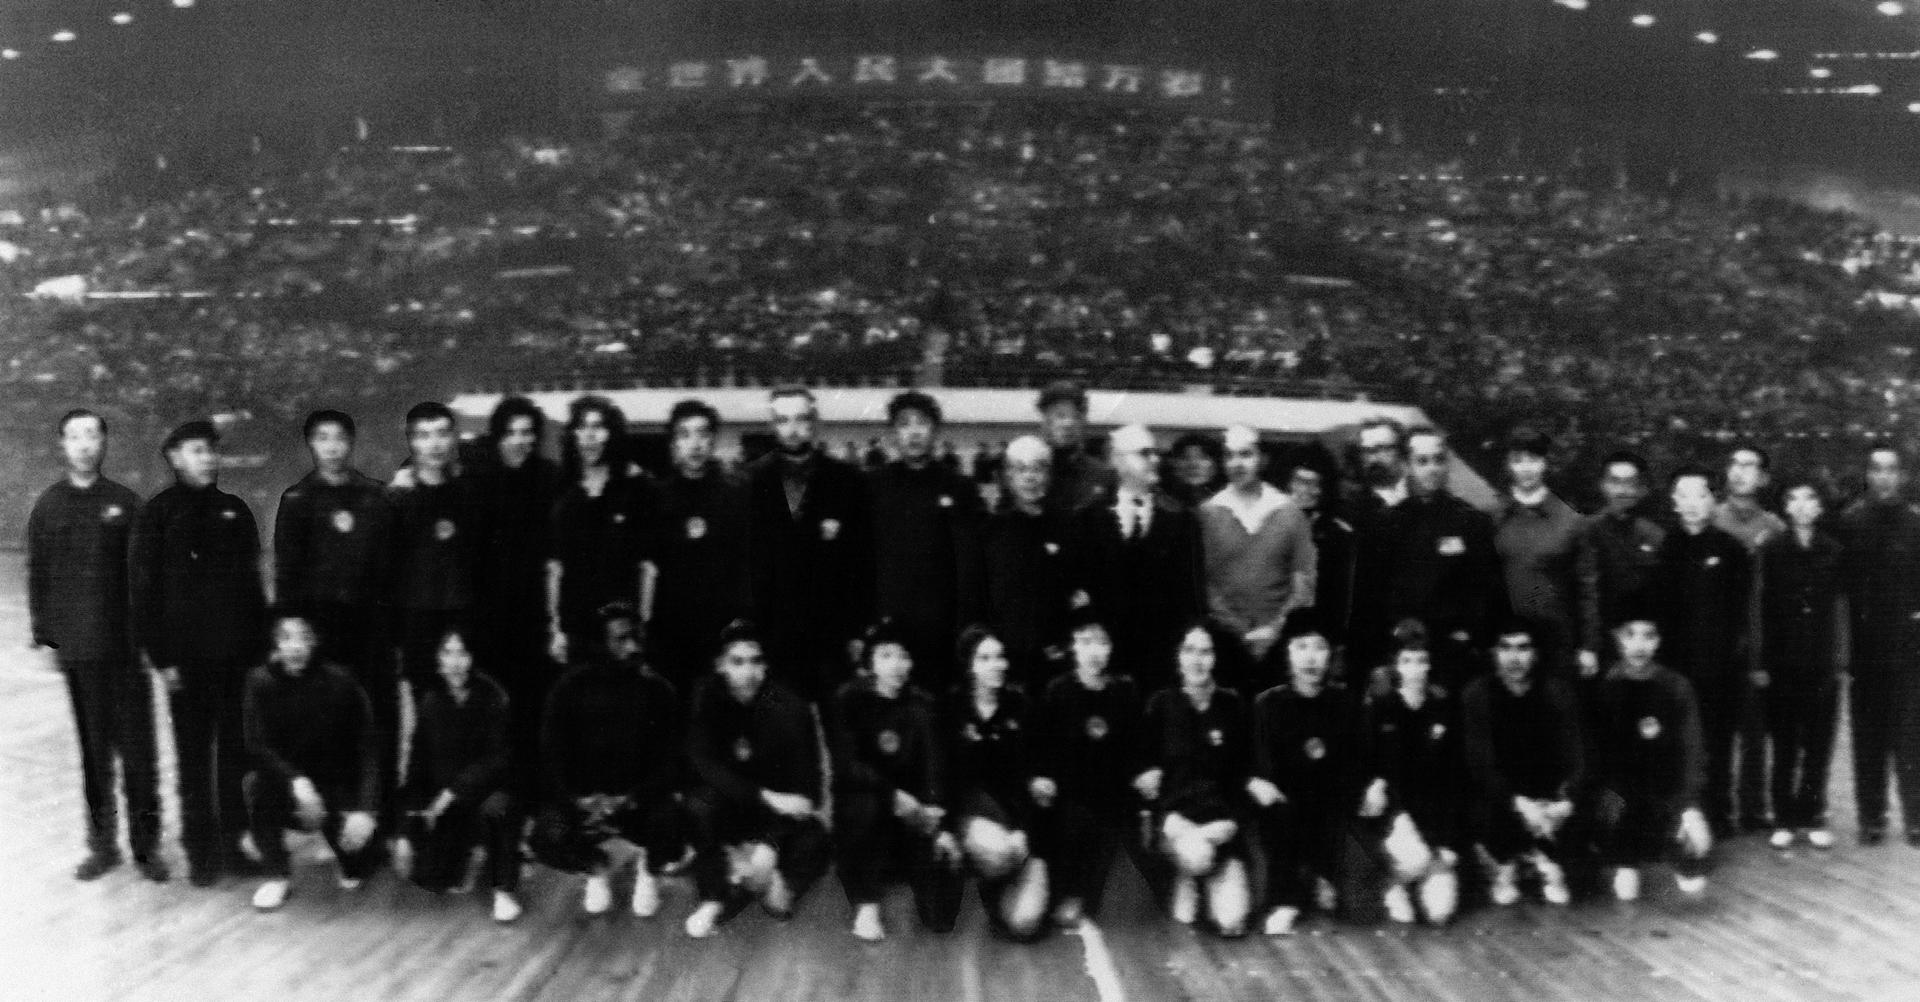 A black and white photo of two pingpong teams from US and China, 1971.